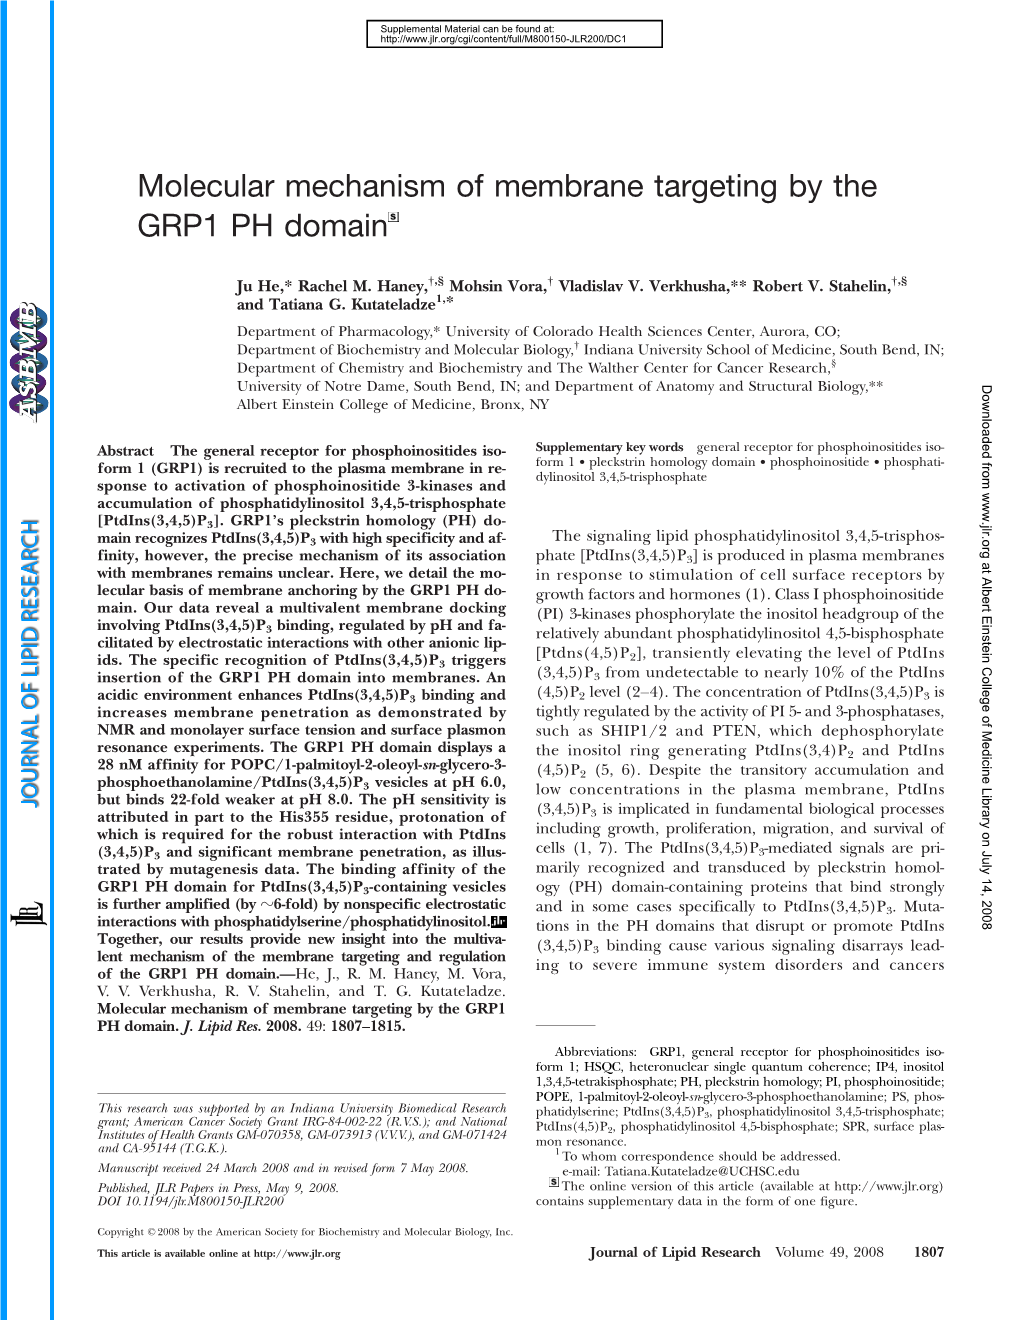 Molecular Mechanism of Membrane Targeting by the GRP1 PH Domain